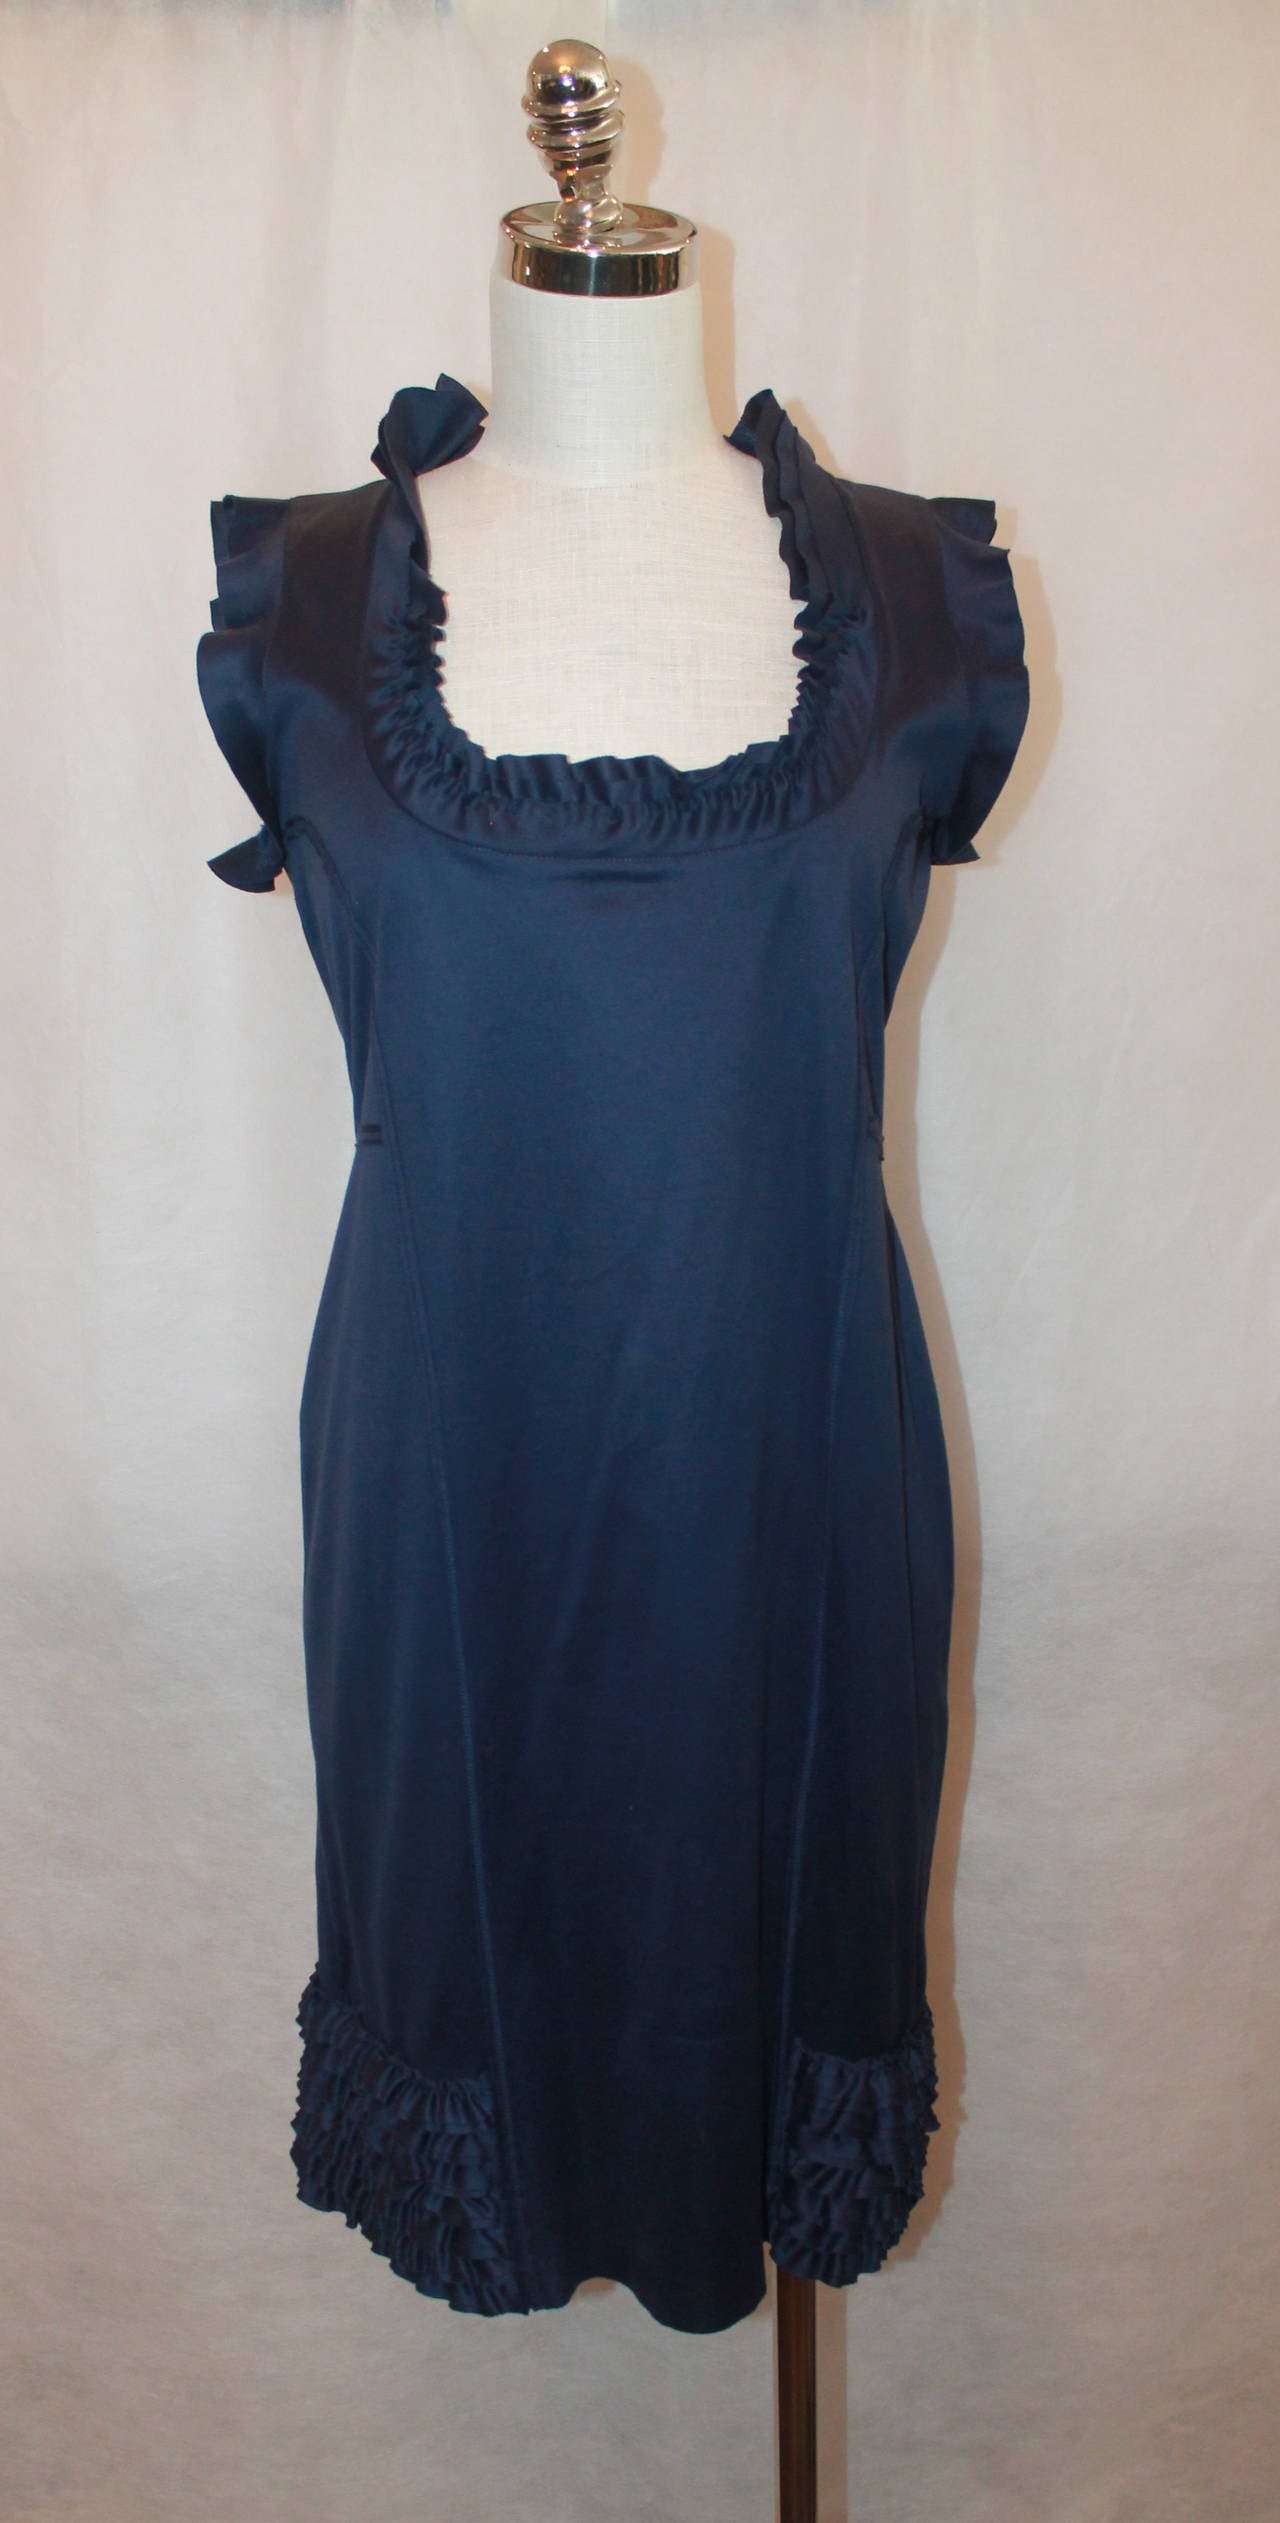 Valentino Navy Ruffle Trim Cotton Sleeveless Dress. This Size 8 Dress is in Excellent Condition.

Fabric: 100 % Cotton

Measurements:
Bust: 36 